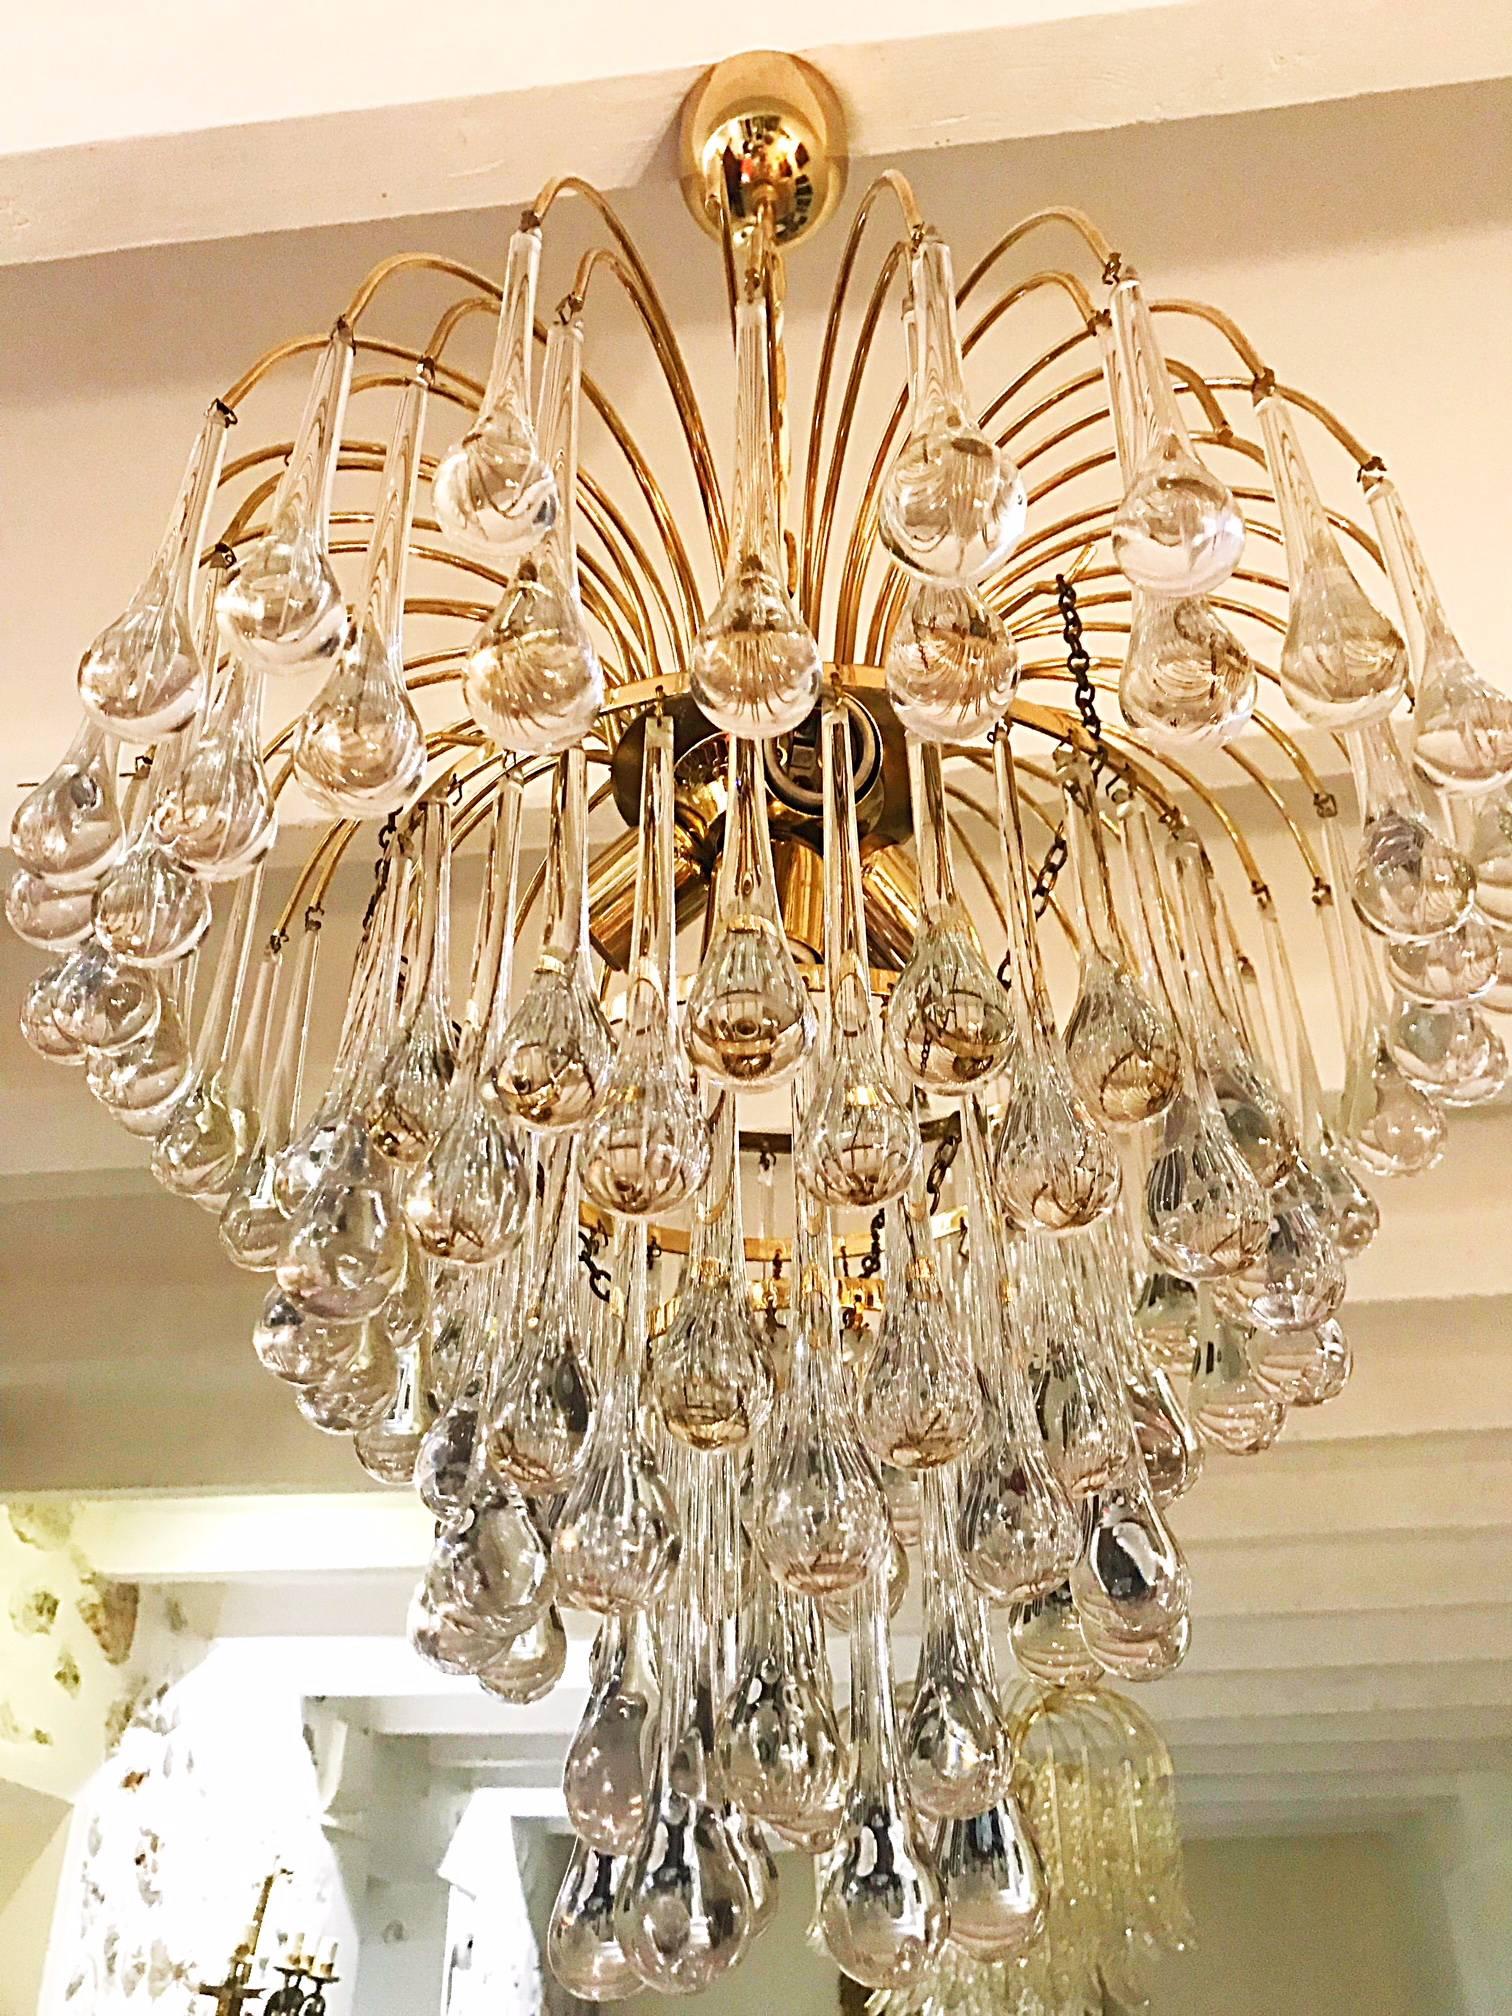 Beautiful multi-tiered tear drop chandelier composed of a multitude of handblown smooth Murano glass drops hanging from a delicate gilt brass hardware. It's in excellent condition with a total of four-light bulbs. Newly rewired.
A real stunning